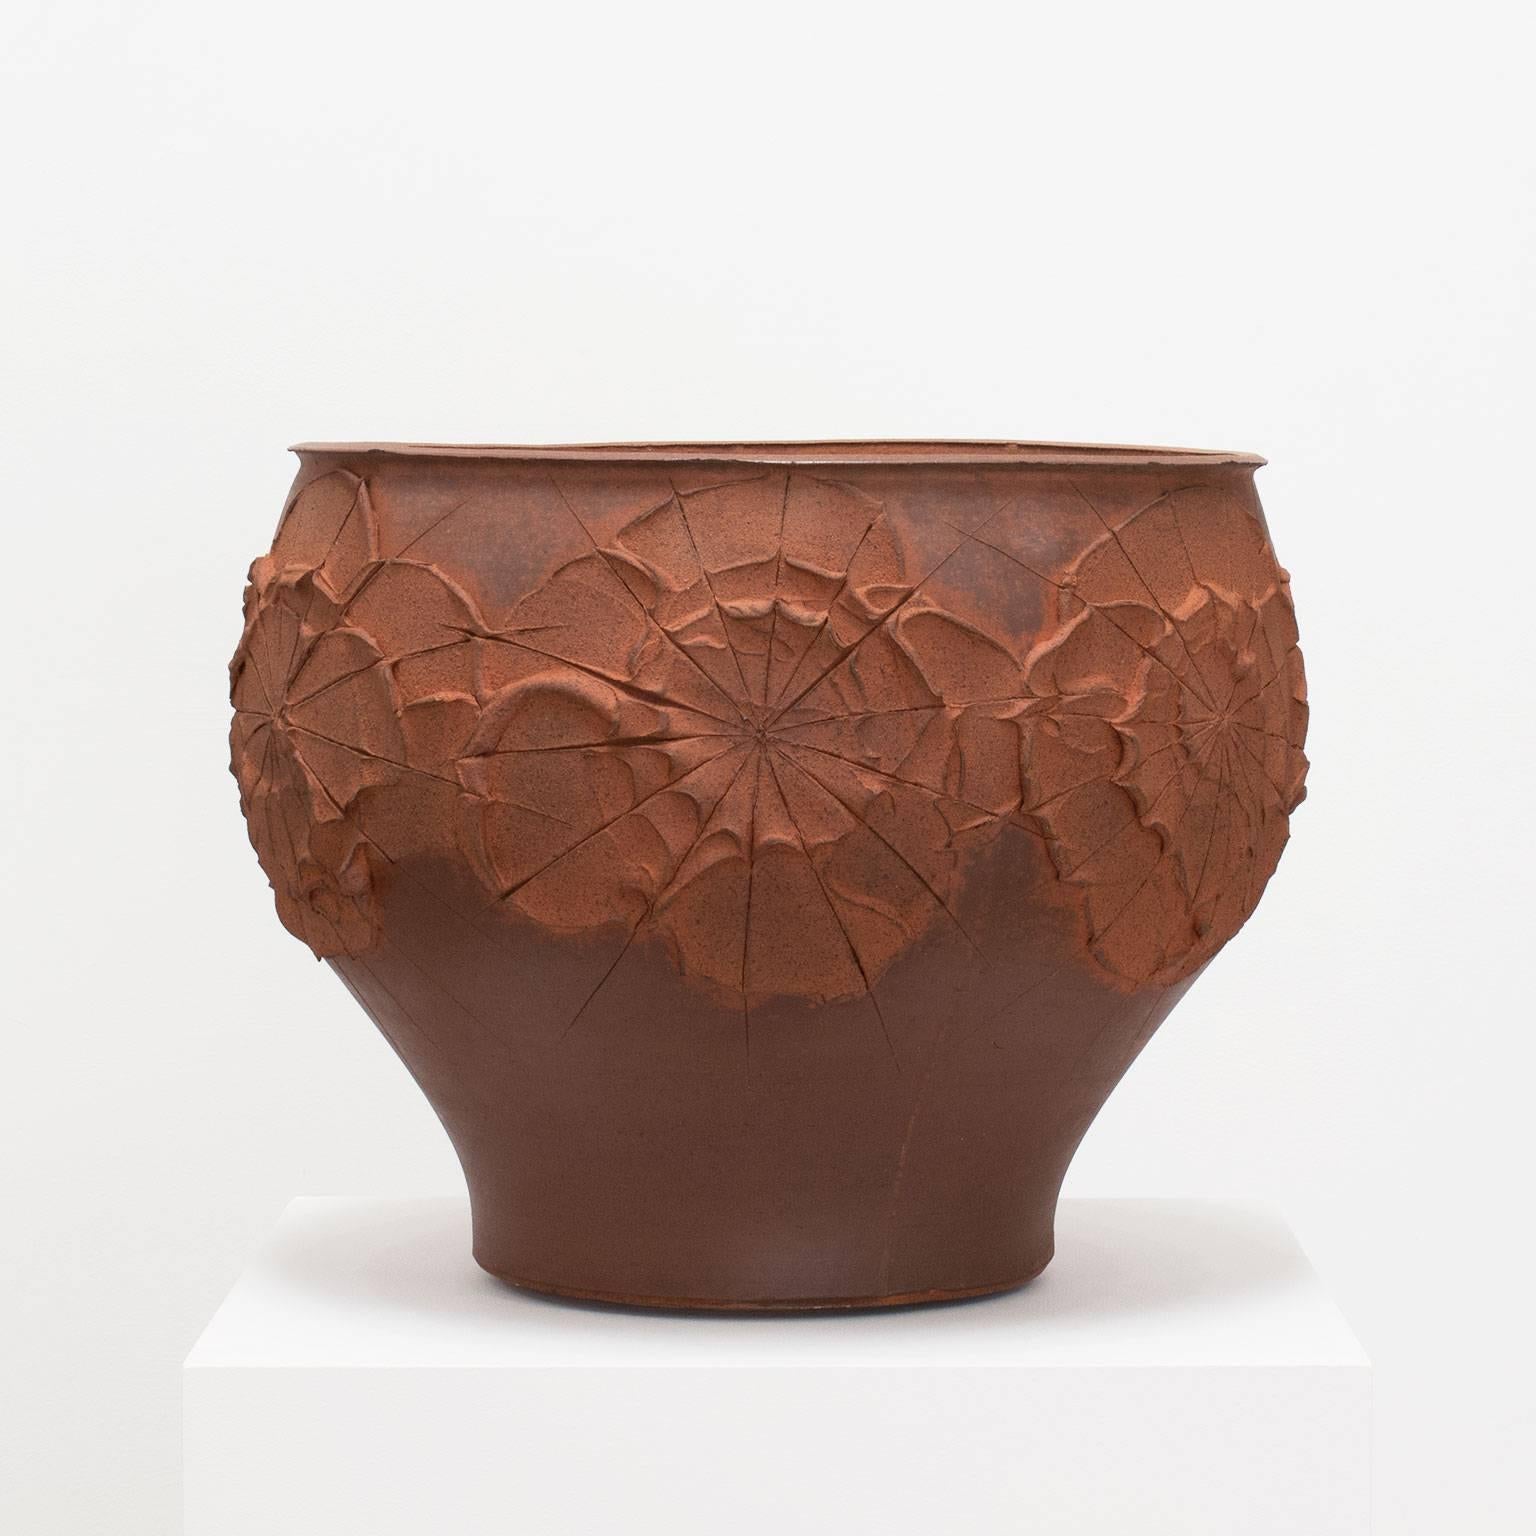 David Cressey 'Solar' design, stoneware, unglazed, 1960s, Pro Artisan collection, Architectural Pottery, Los Angeles, California. Measures: 15 high x 20 diameter inches (38.1 high x 50.8 diameter cm), weight 30.5 pounds.